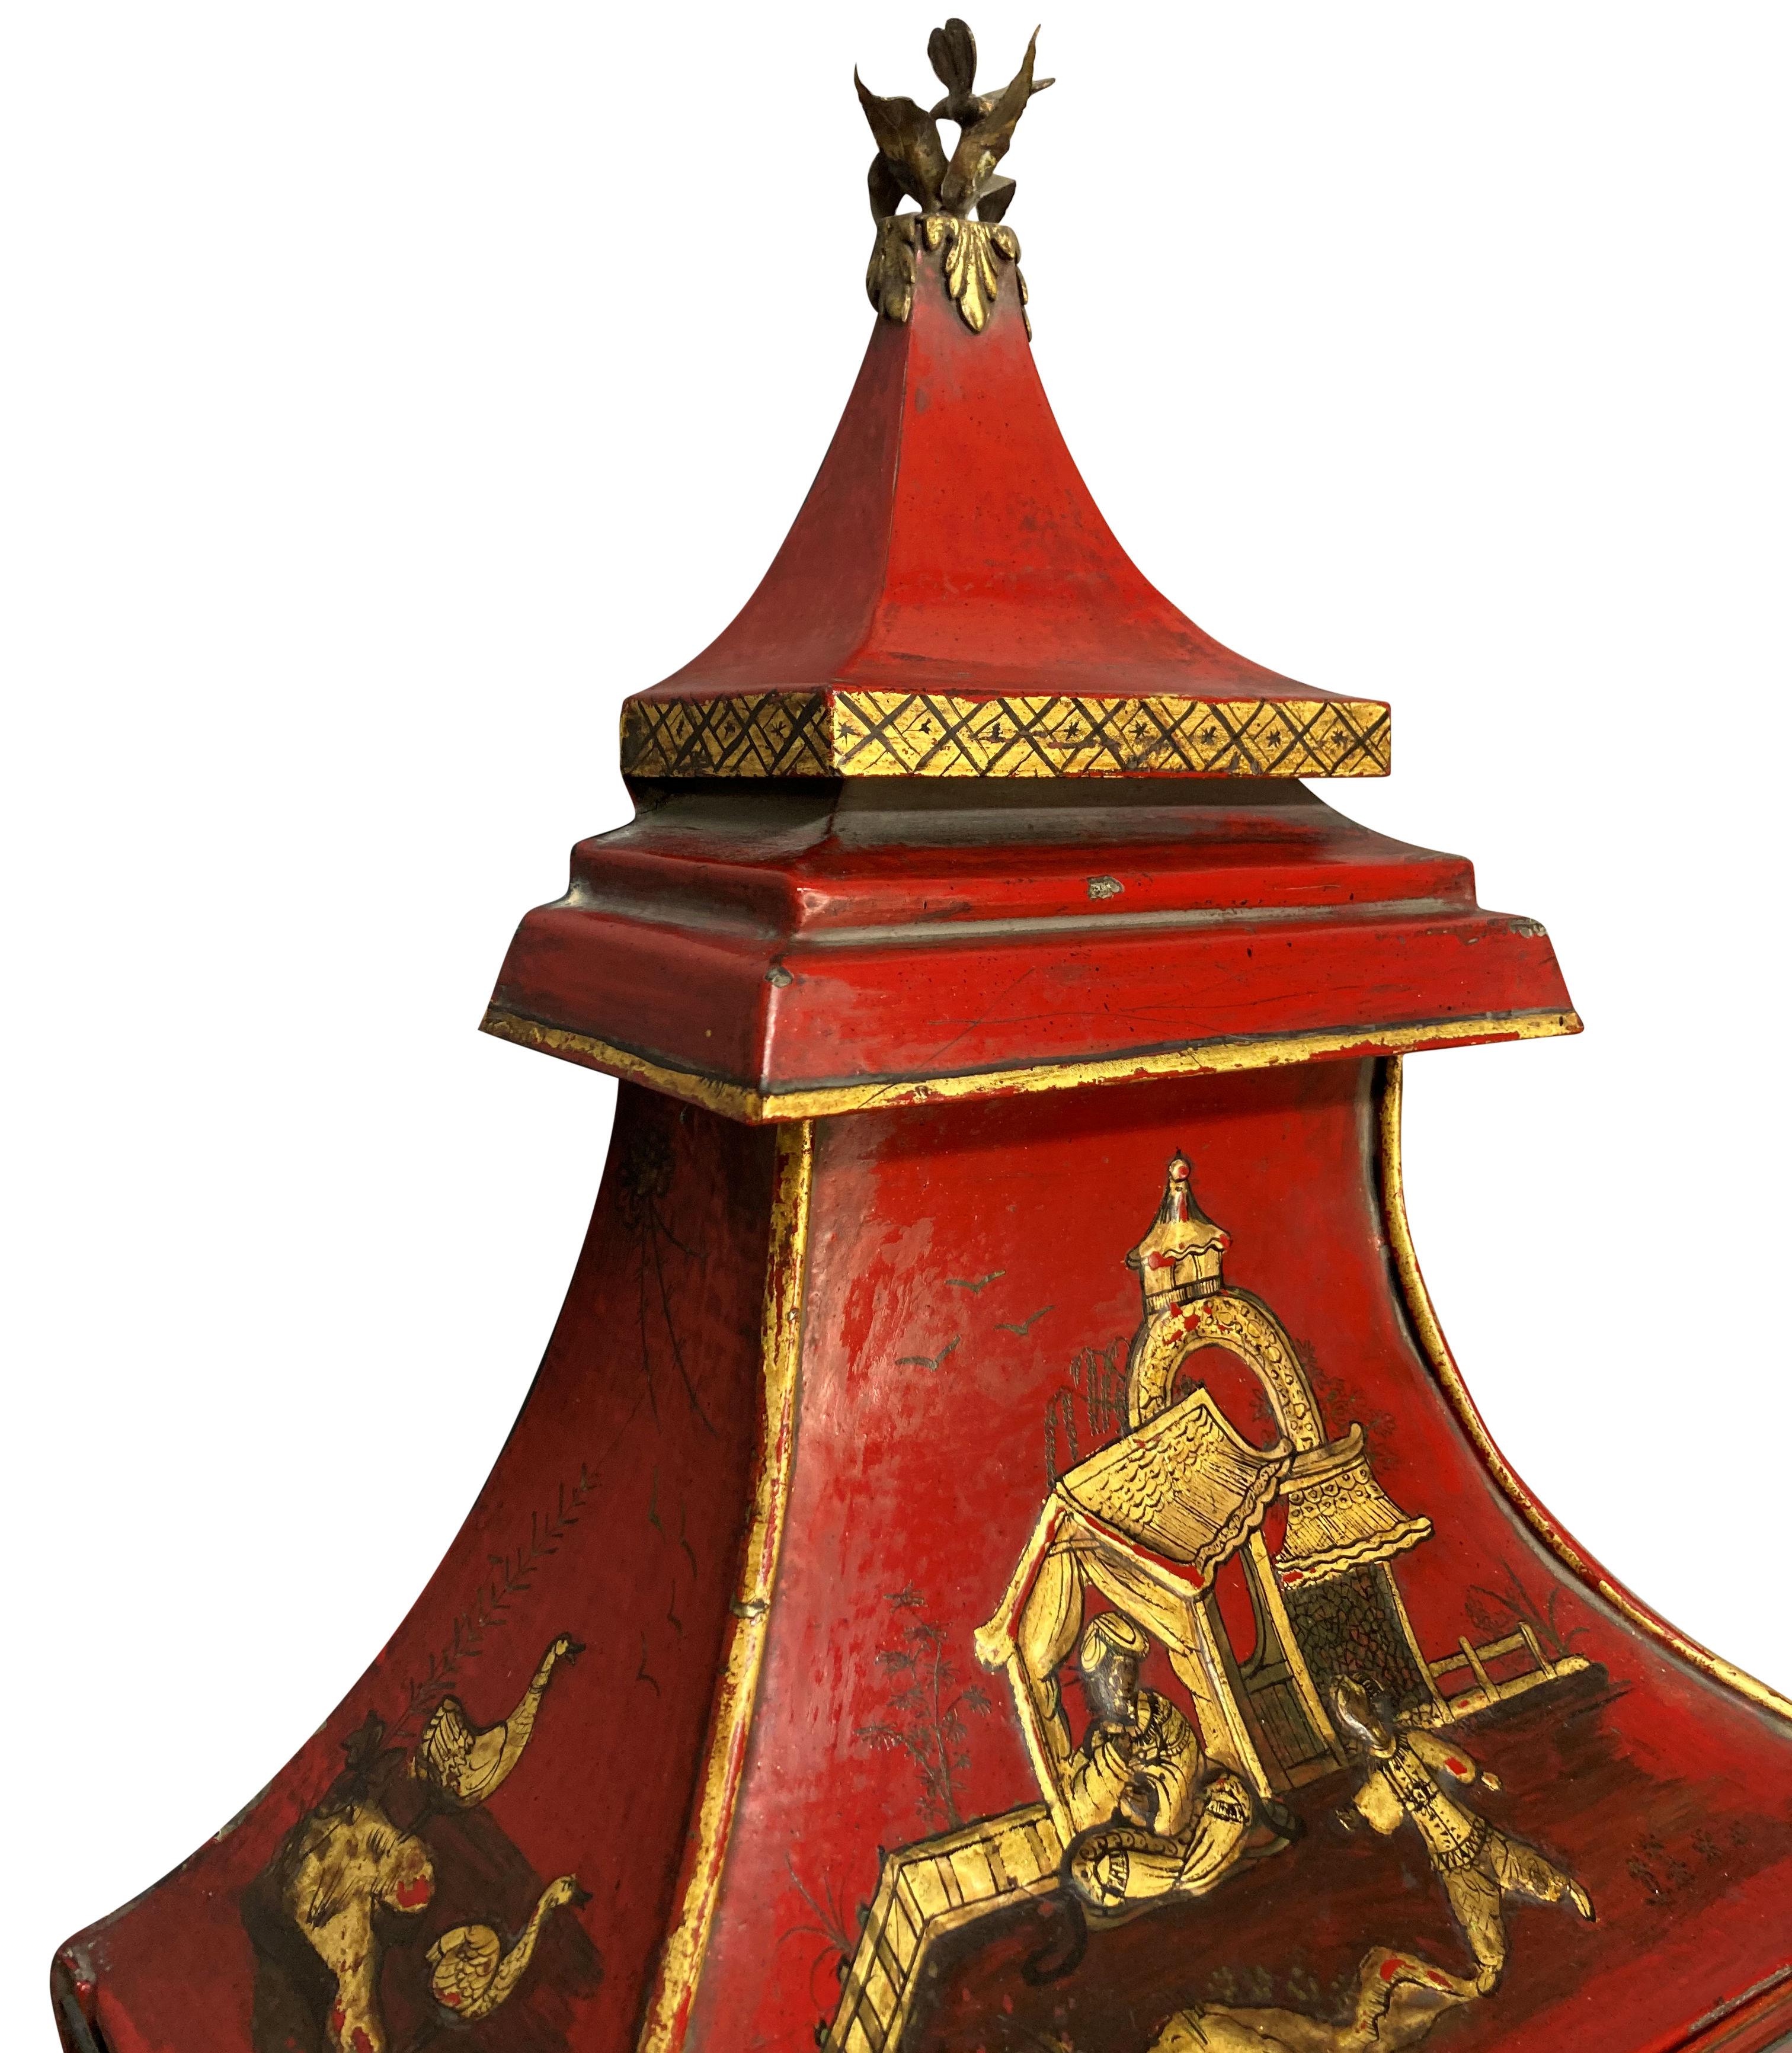 An impressive pair of English Regency style scarlet and gilt japanned tapering, pagoda shaped wall lanterns. With mercury mirror glass back plates and a gilt bronze acanthus single arm sconce. Beautifully hand decorated throughout and with clear